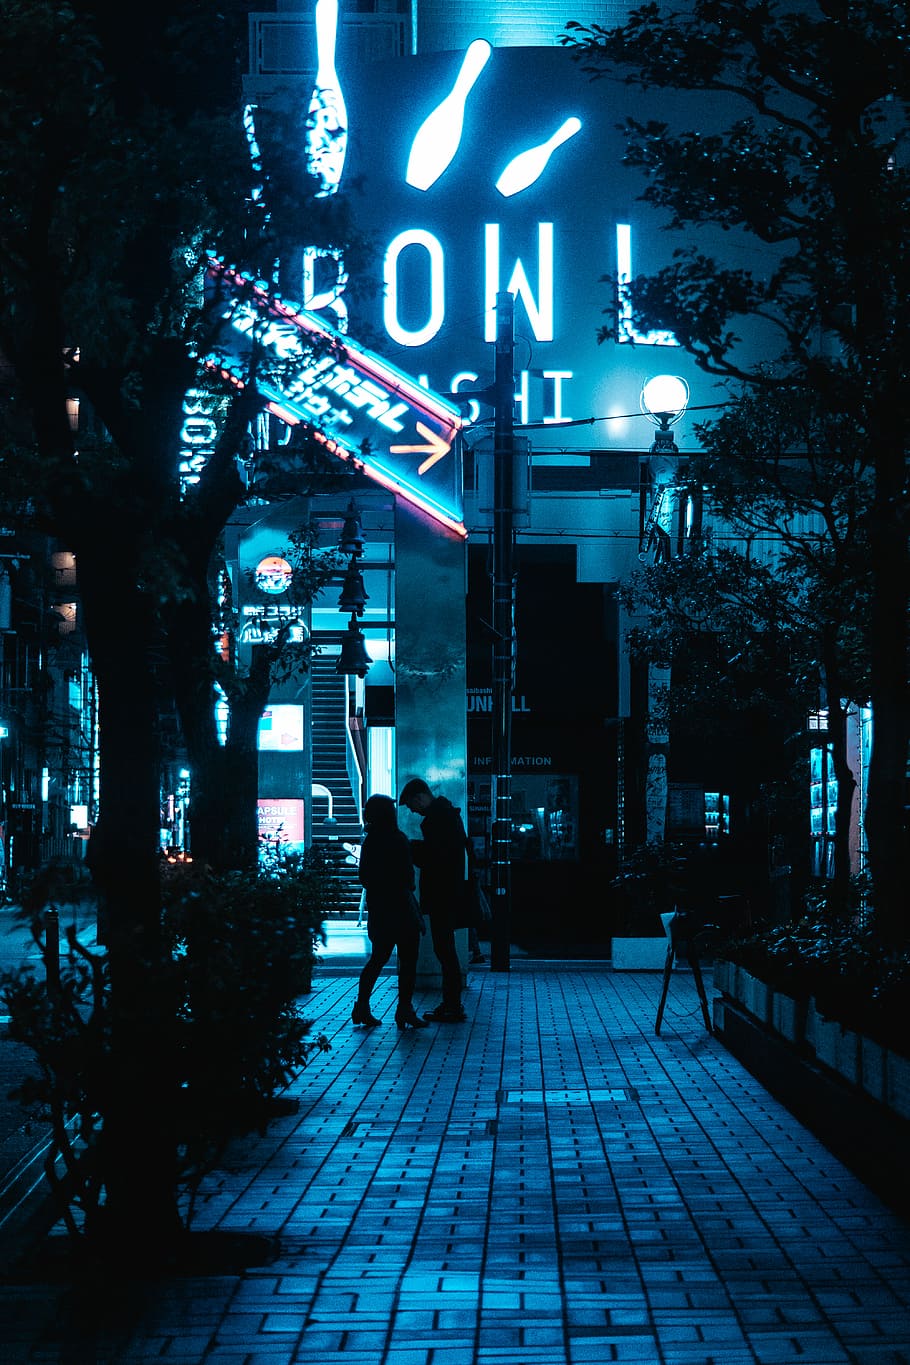 man and woman standing in front of bowl building, urban, neon light